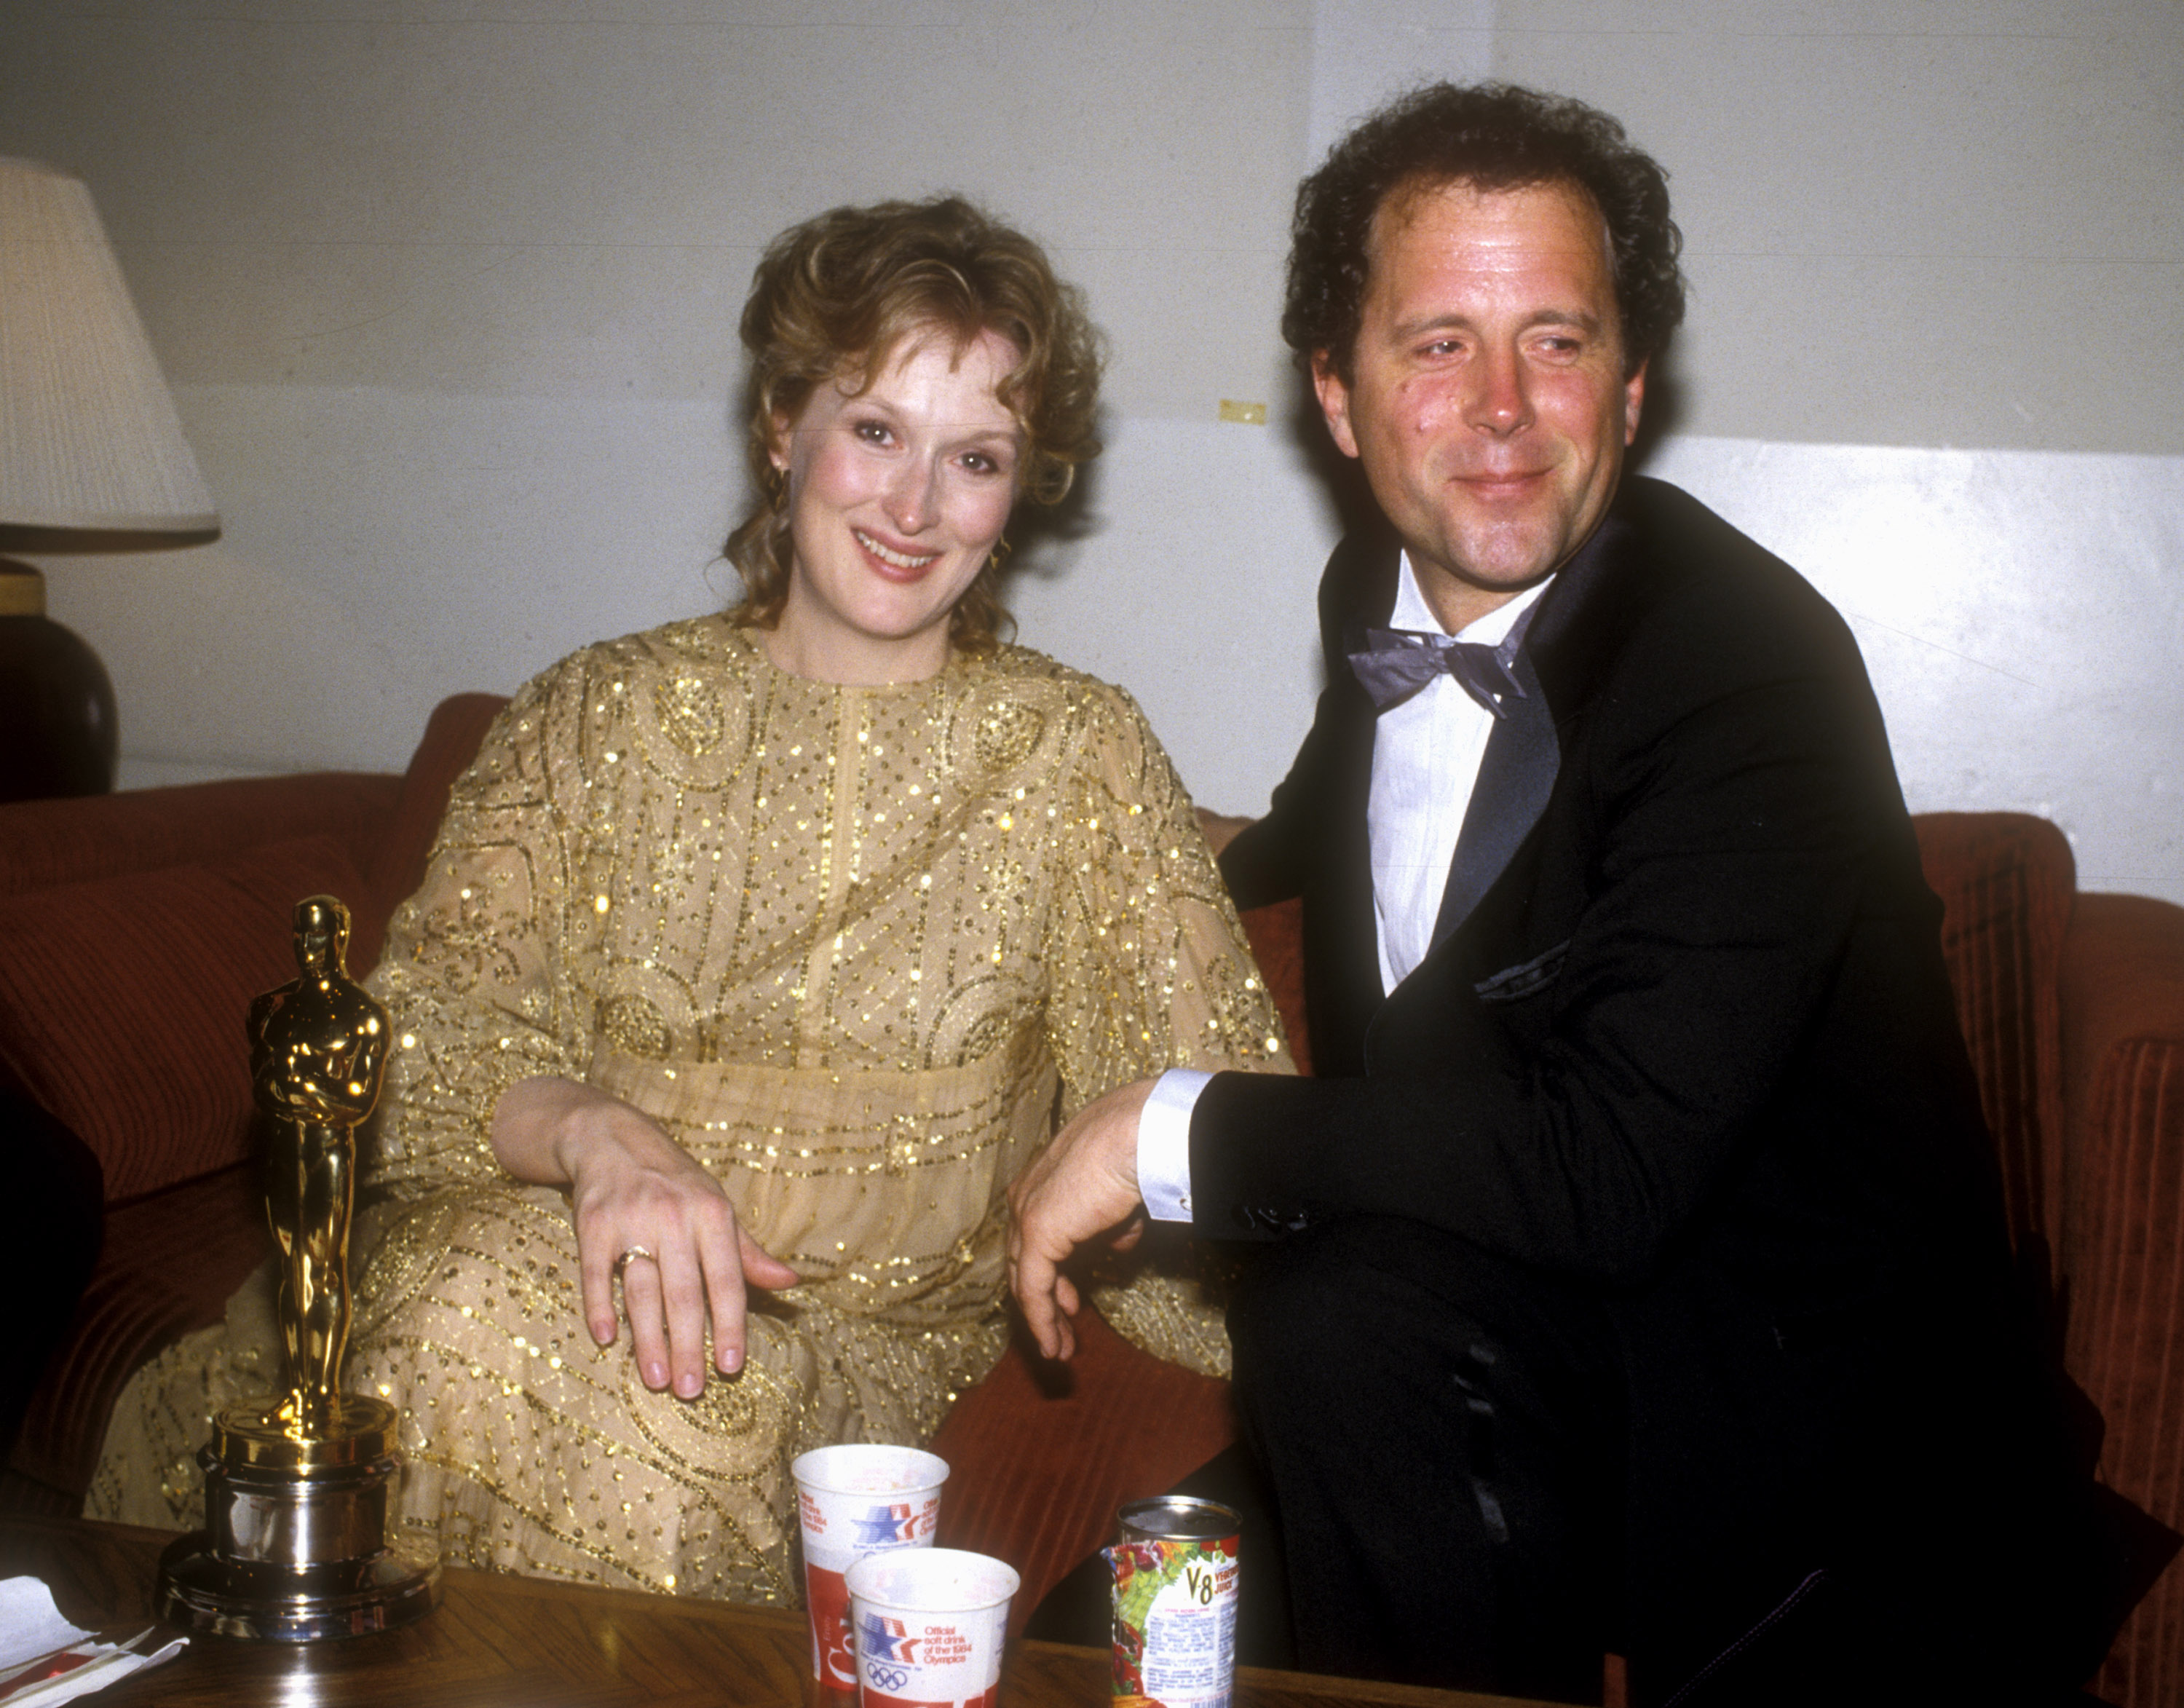 Mery Streep and Don Gummer at 55th Annual Academy Awards on April 11, 1983 | Source: Getty Images